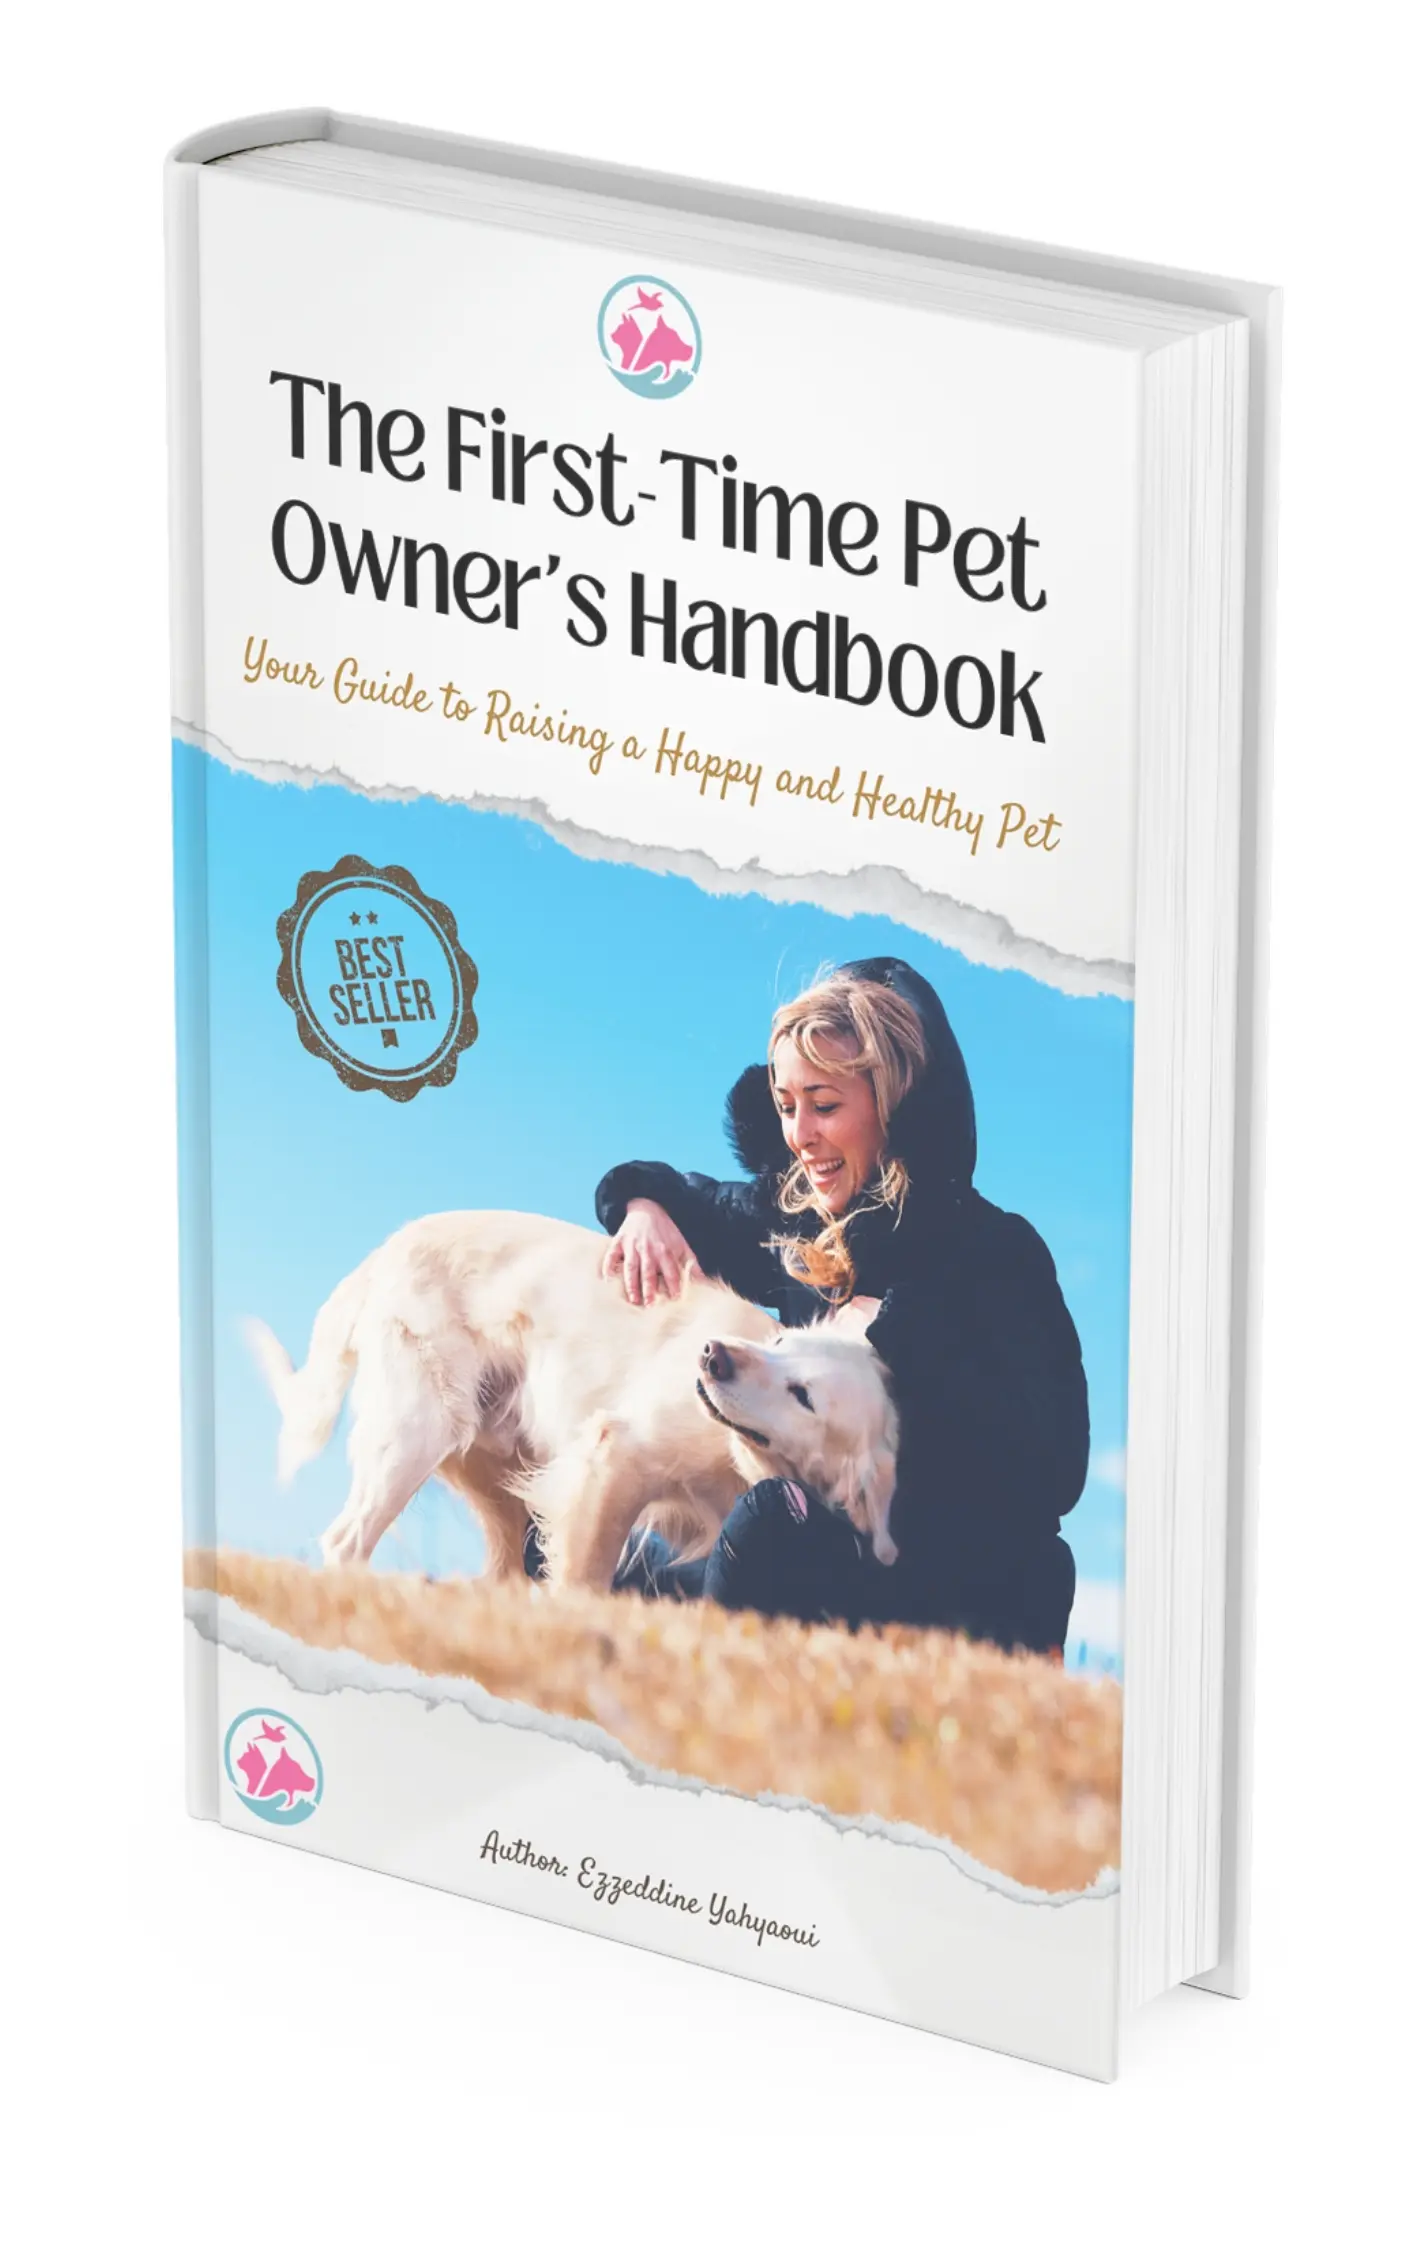 The First-Time Pet Owner's Handbook